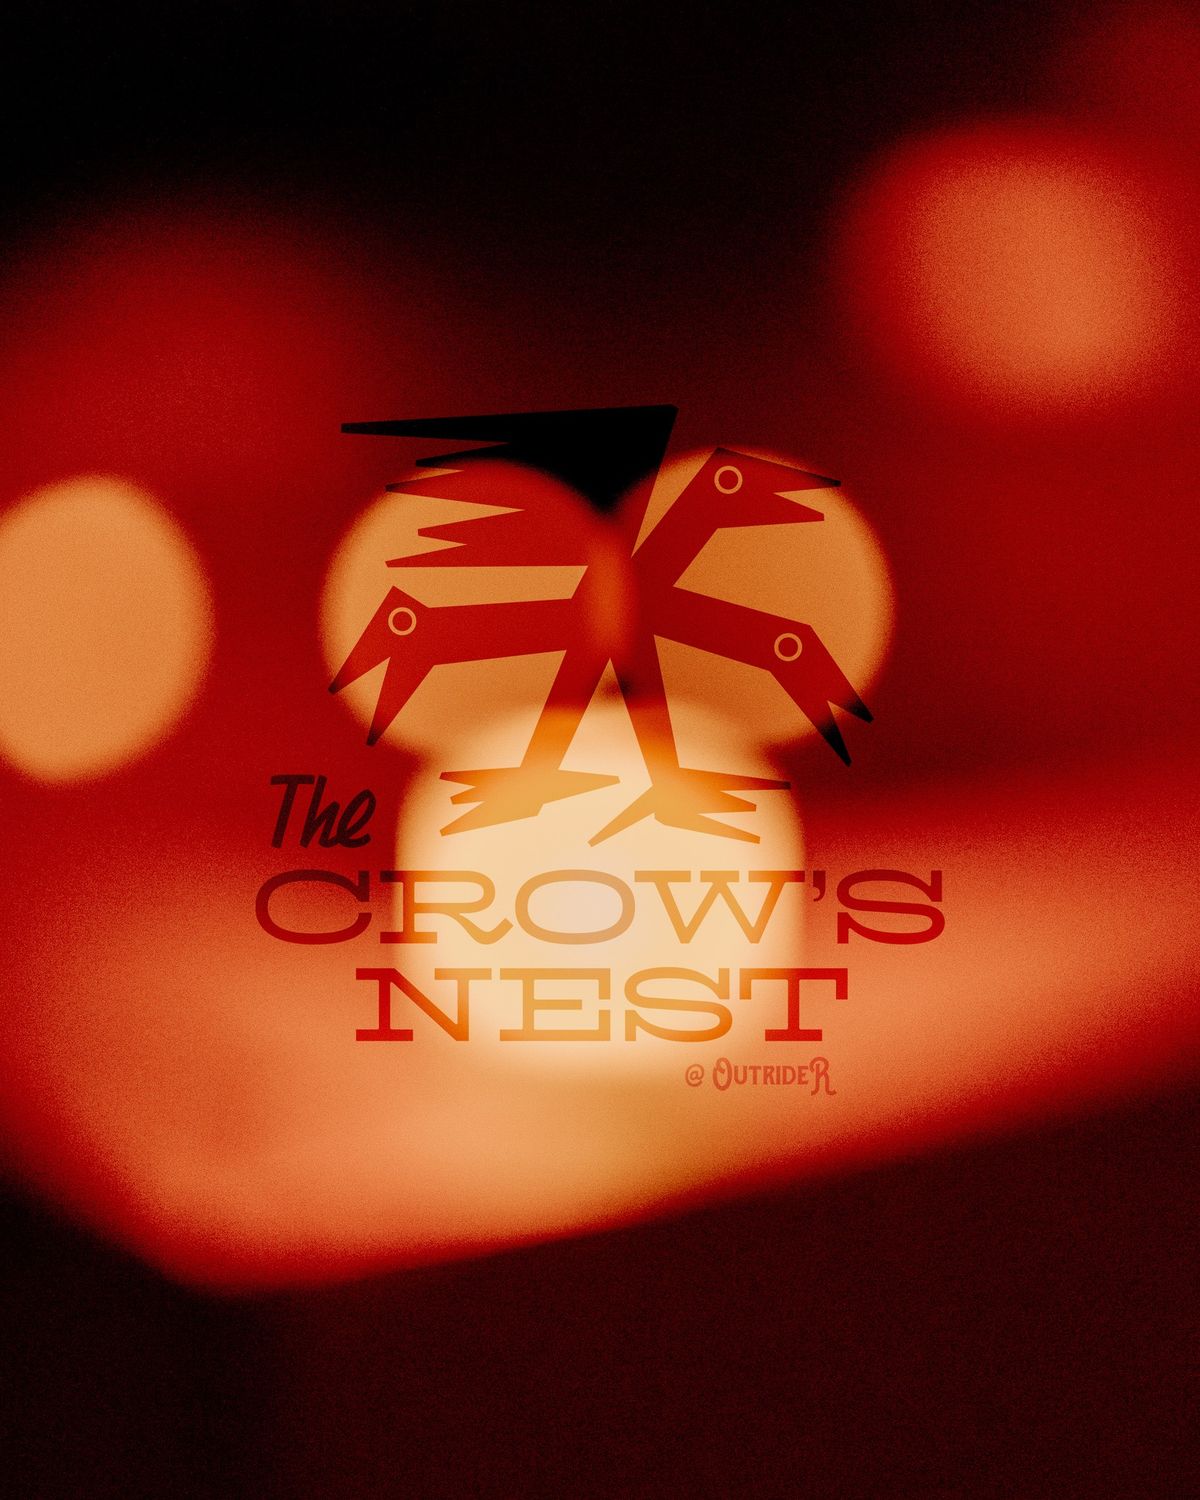 The Crow's Nest at Outrider 